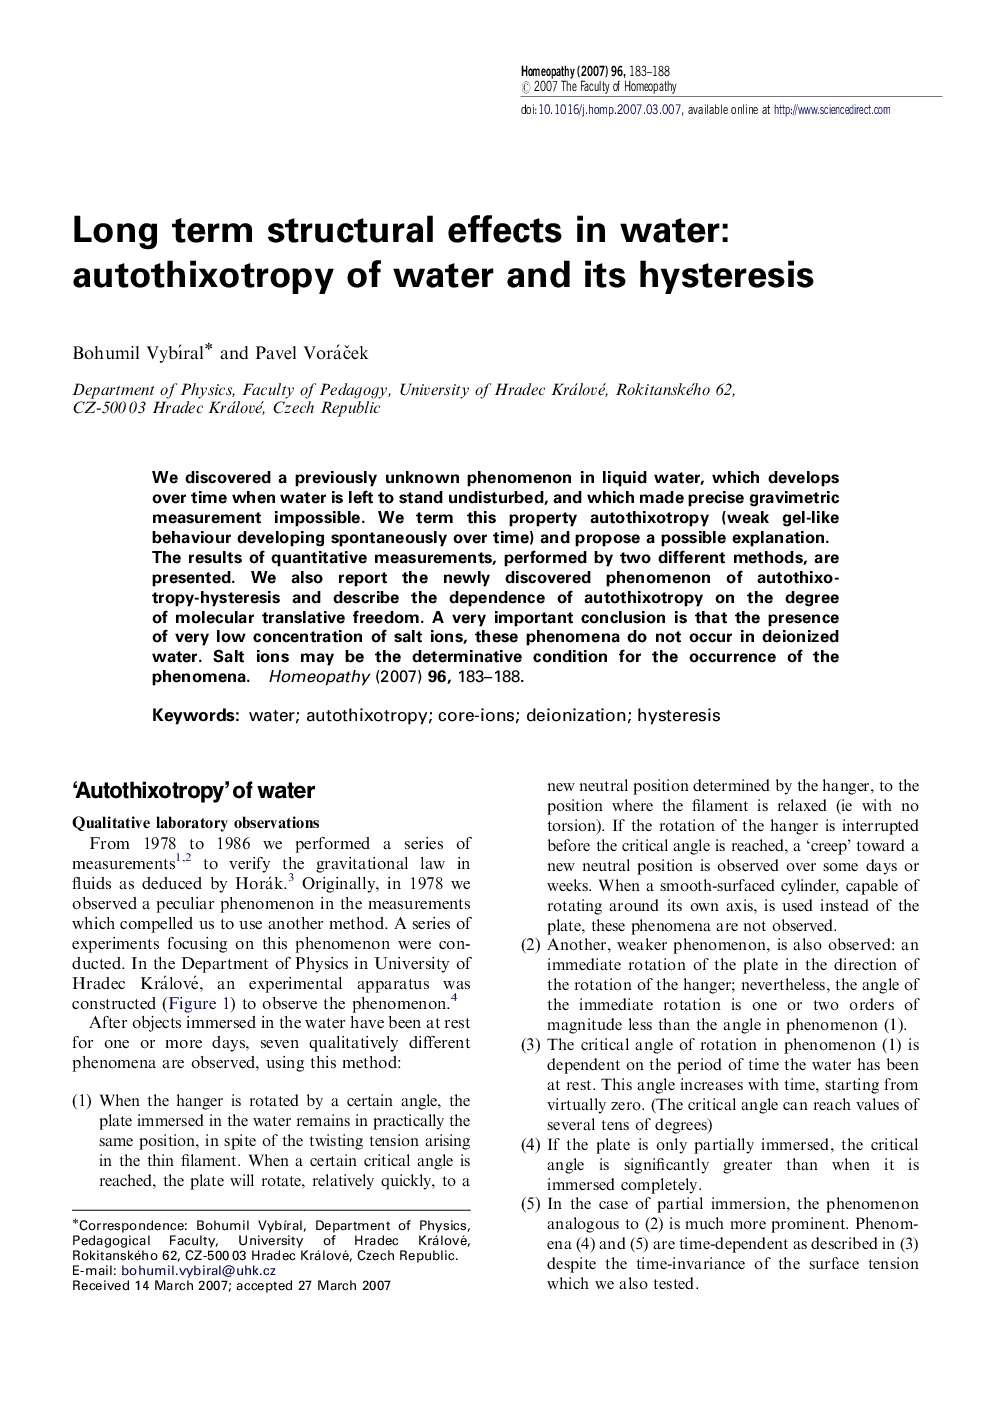 Long term structural effects in water: autothixotropy of water and its hysteresis